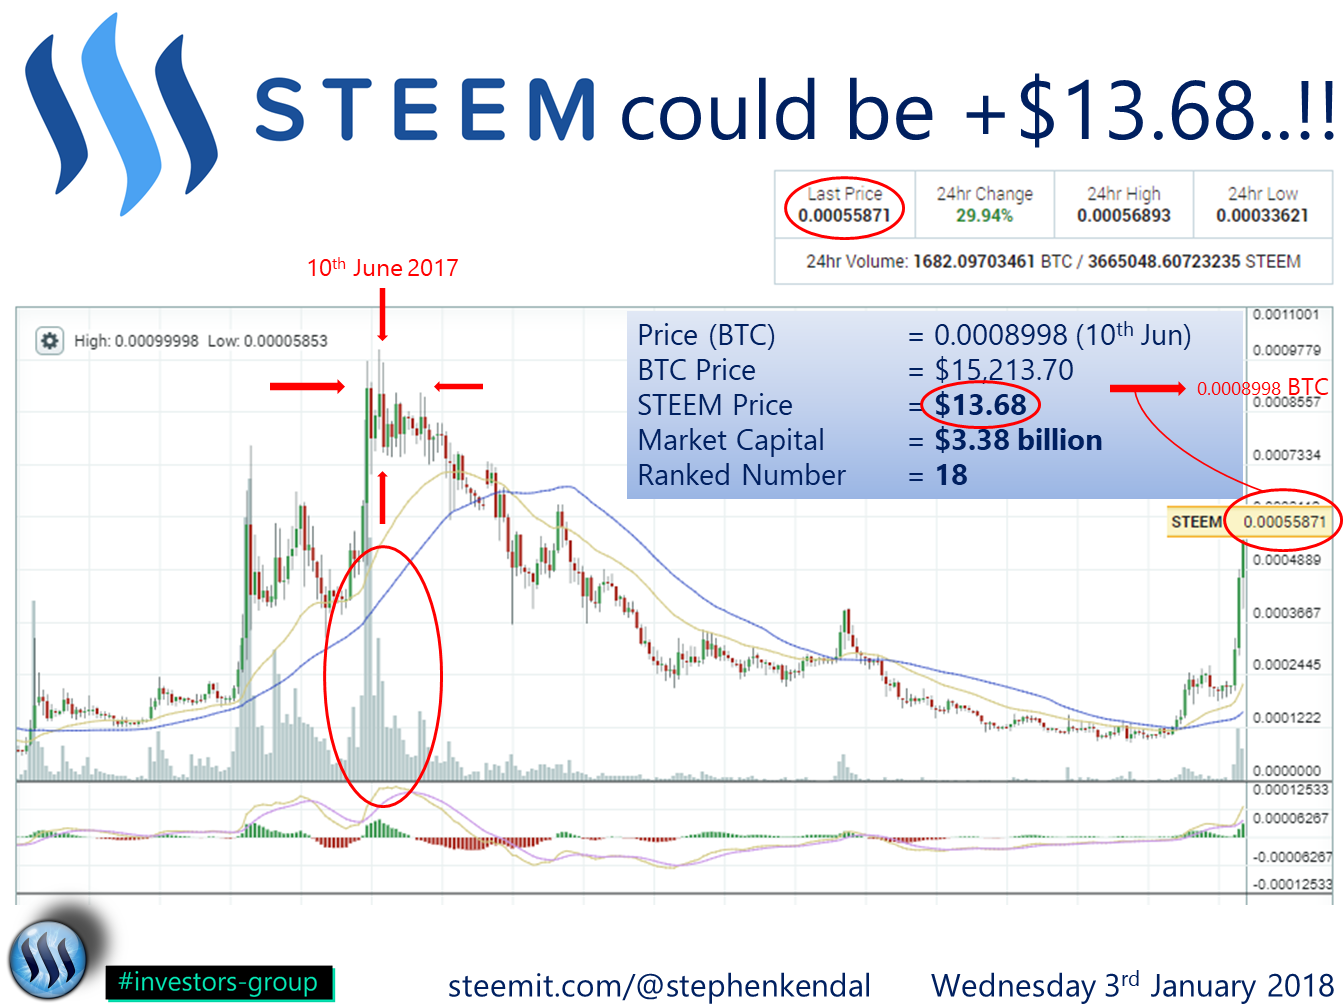 Steem could be +$13.68.png